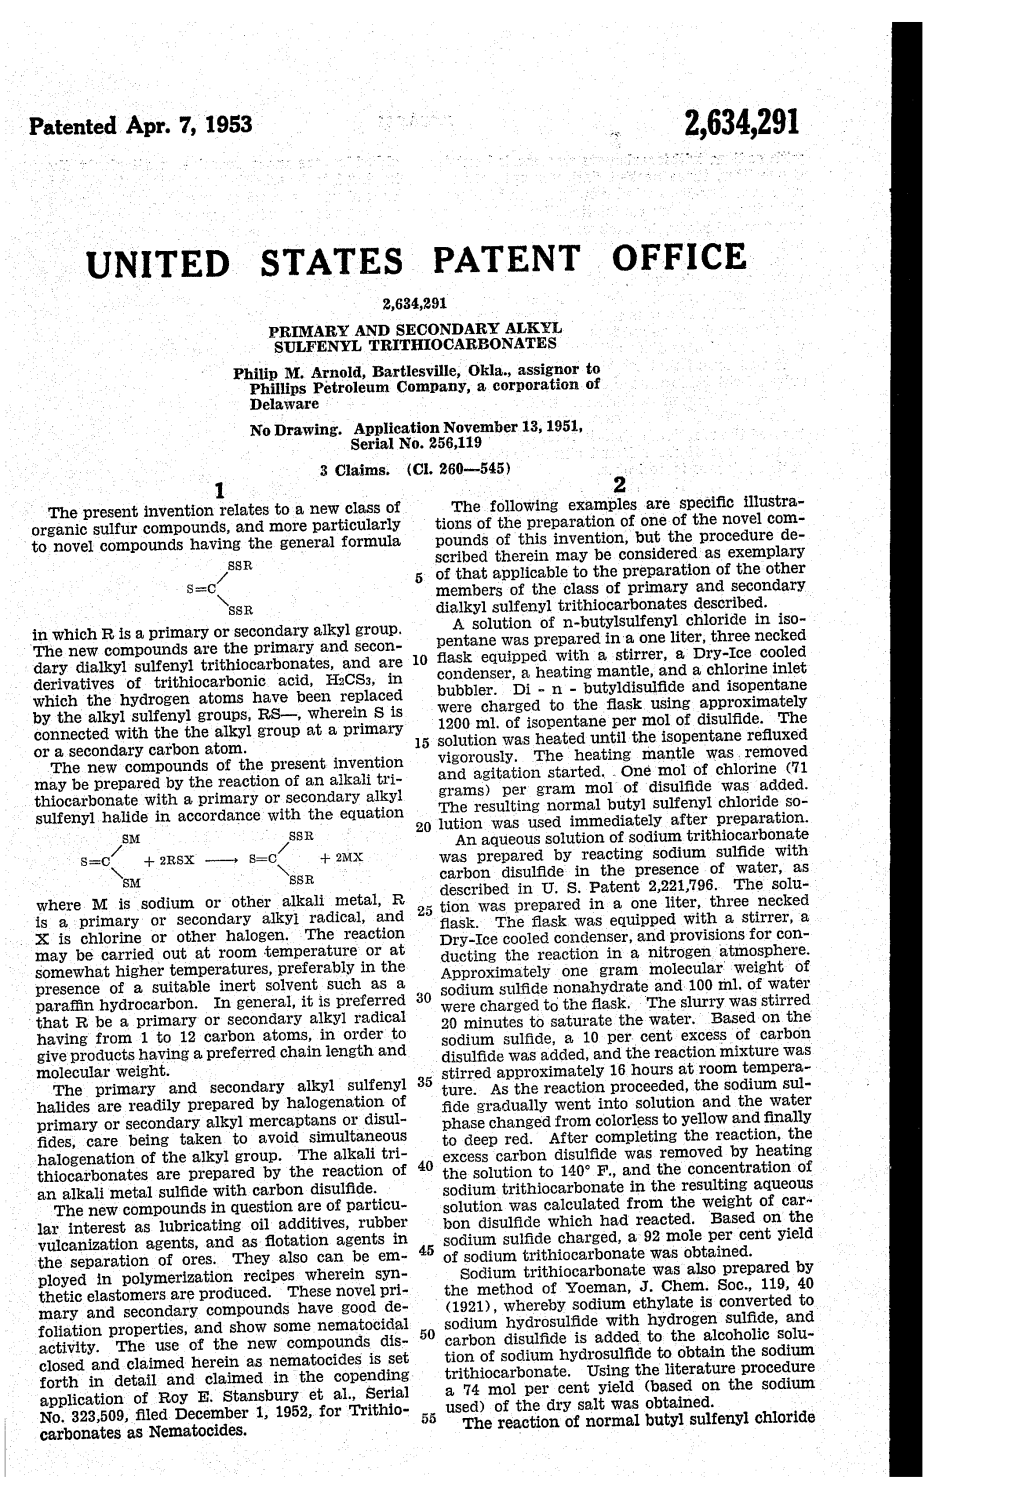 UNITED STATES PATENT OFFICE 2,634,291 PRIMARY and SECONDARY ALKYL SULFENYLTRITHIOCARBONATES Philip M